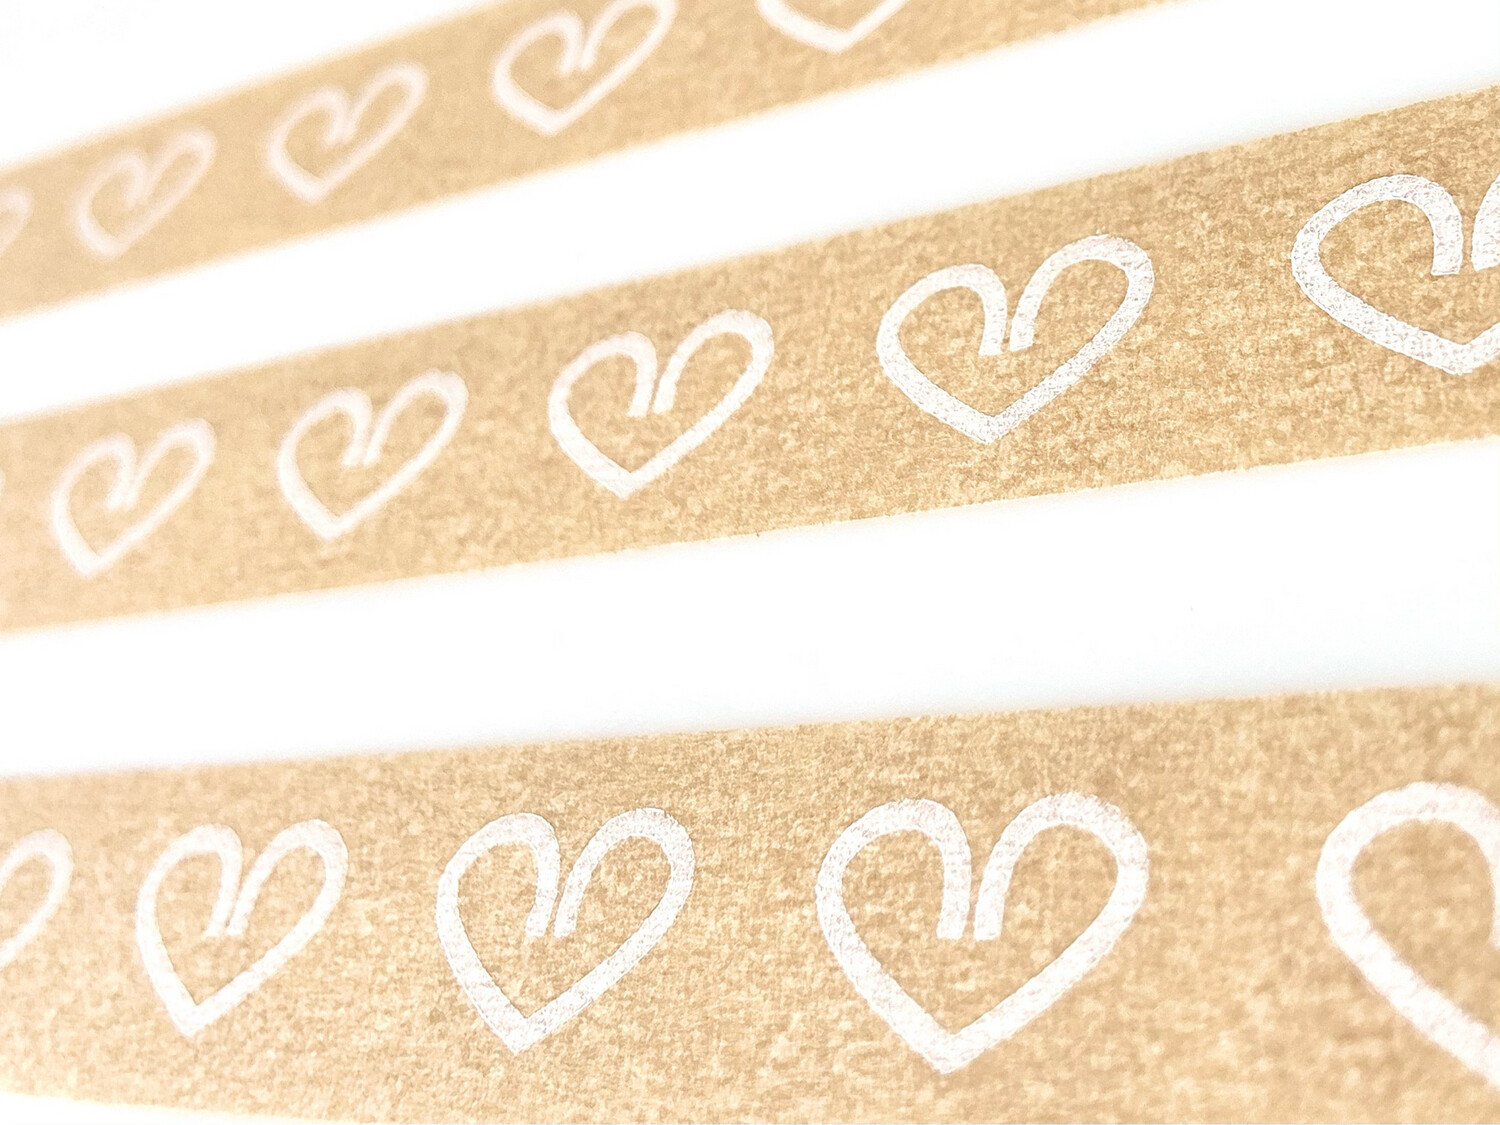 Big Heart - NATURALLY WRAPT Brown Paper Tape 18mm